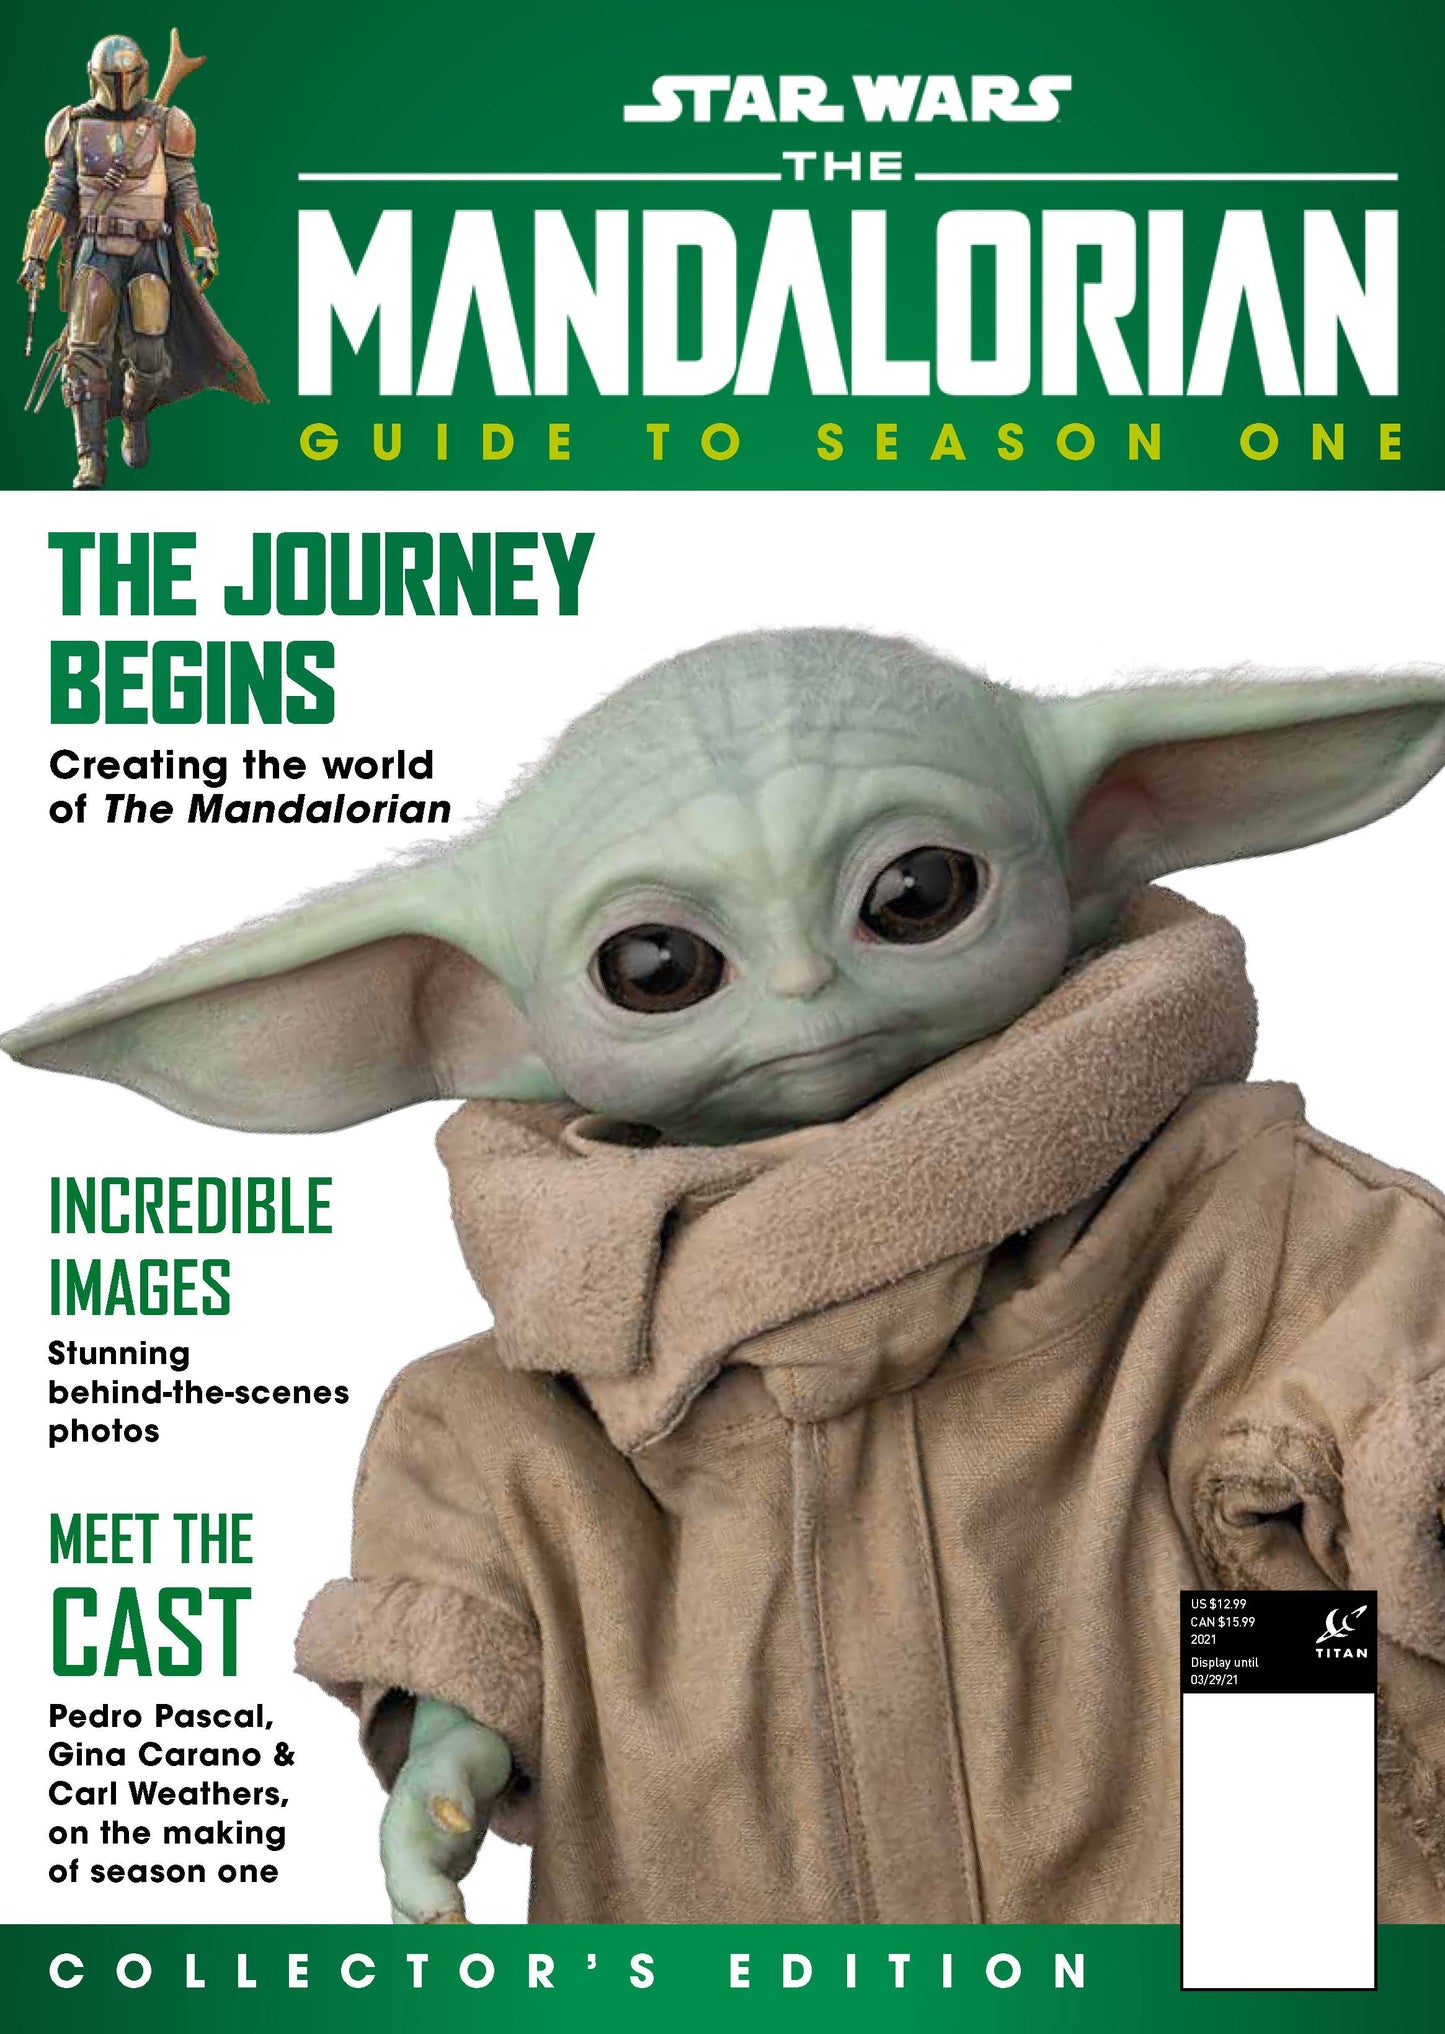 Star Wars Mandalorian Guide To Season 1 Hc Newstand (05/19/2021) %product_vendow% - The One Stop Shop Comics & Games